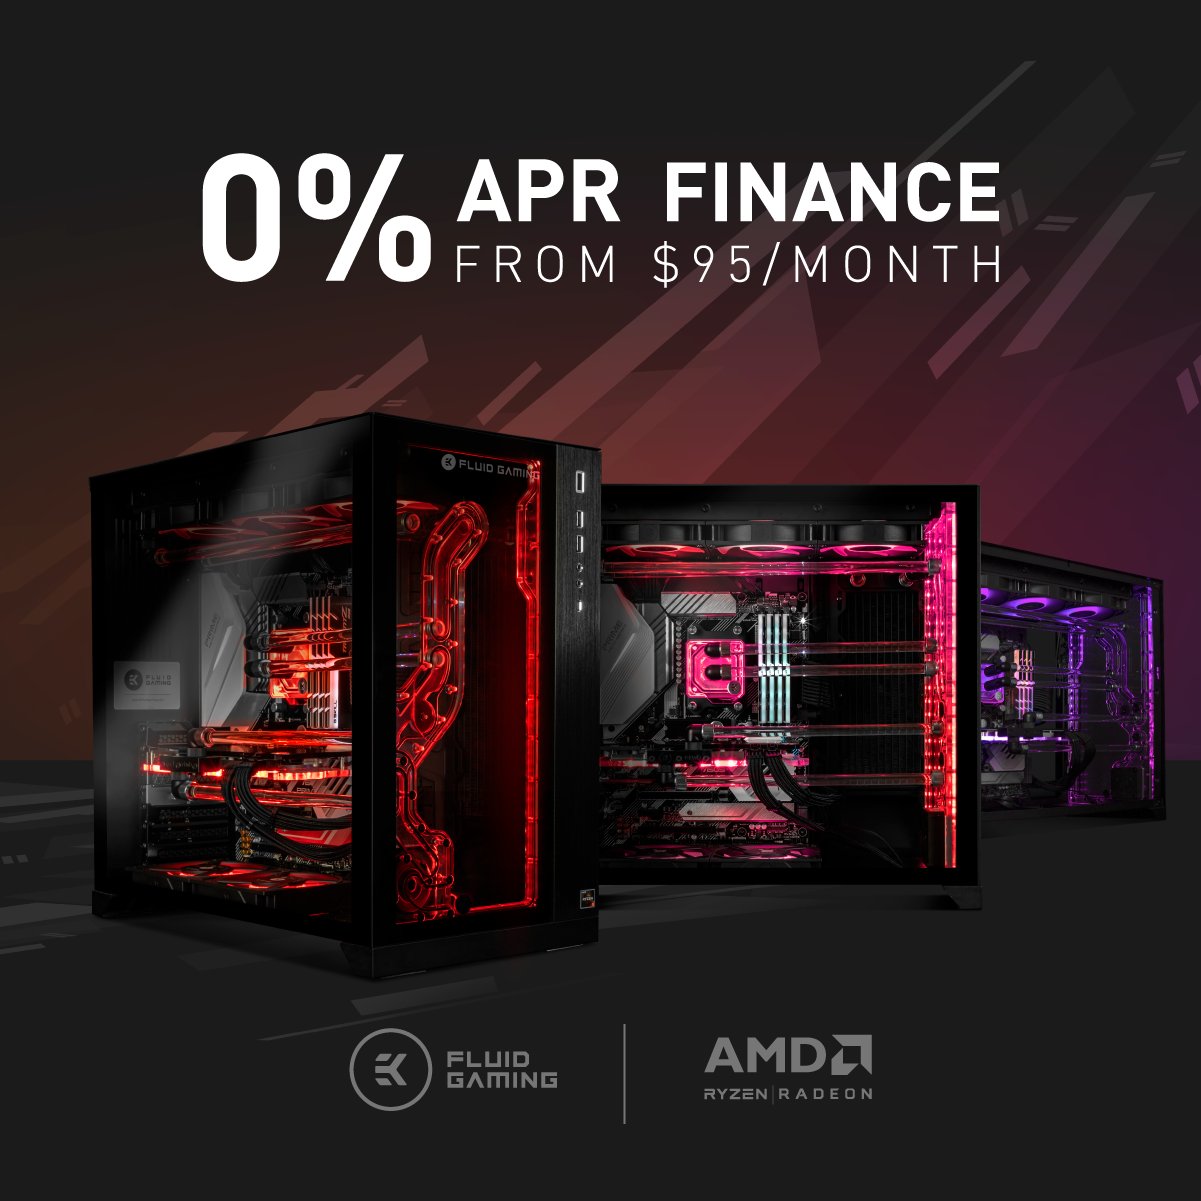 EK FluidGaming on Twitter: "Get Your Ultimate Fully Liquid-Cooled @AMD Gaming  PC 💻 Play Now 👾 Pay Later 📆 with 0% APR Finance ✍ 5 Minute Application  with Instant Approval ✓ Find